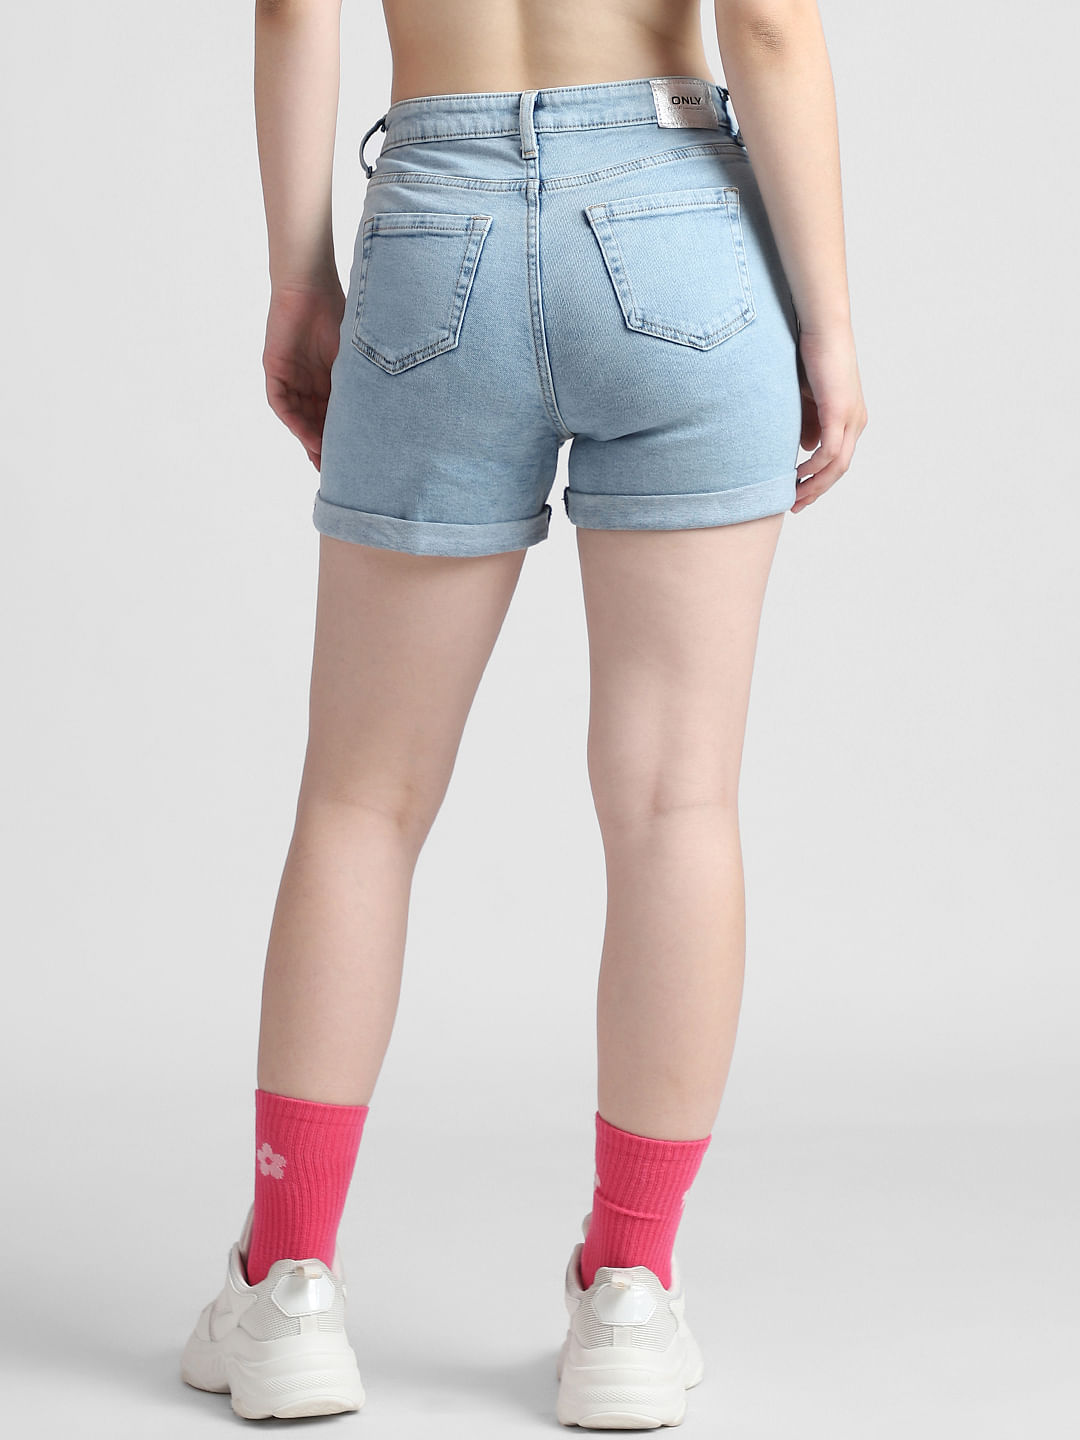 Photo of Closeup of woman in mini denim shorts with long sexy legs in high  heel shoes | Stock Image MXI33734